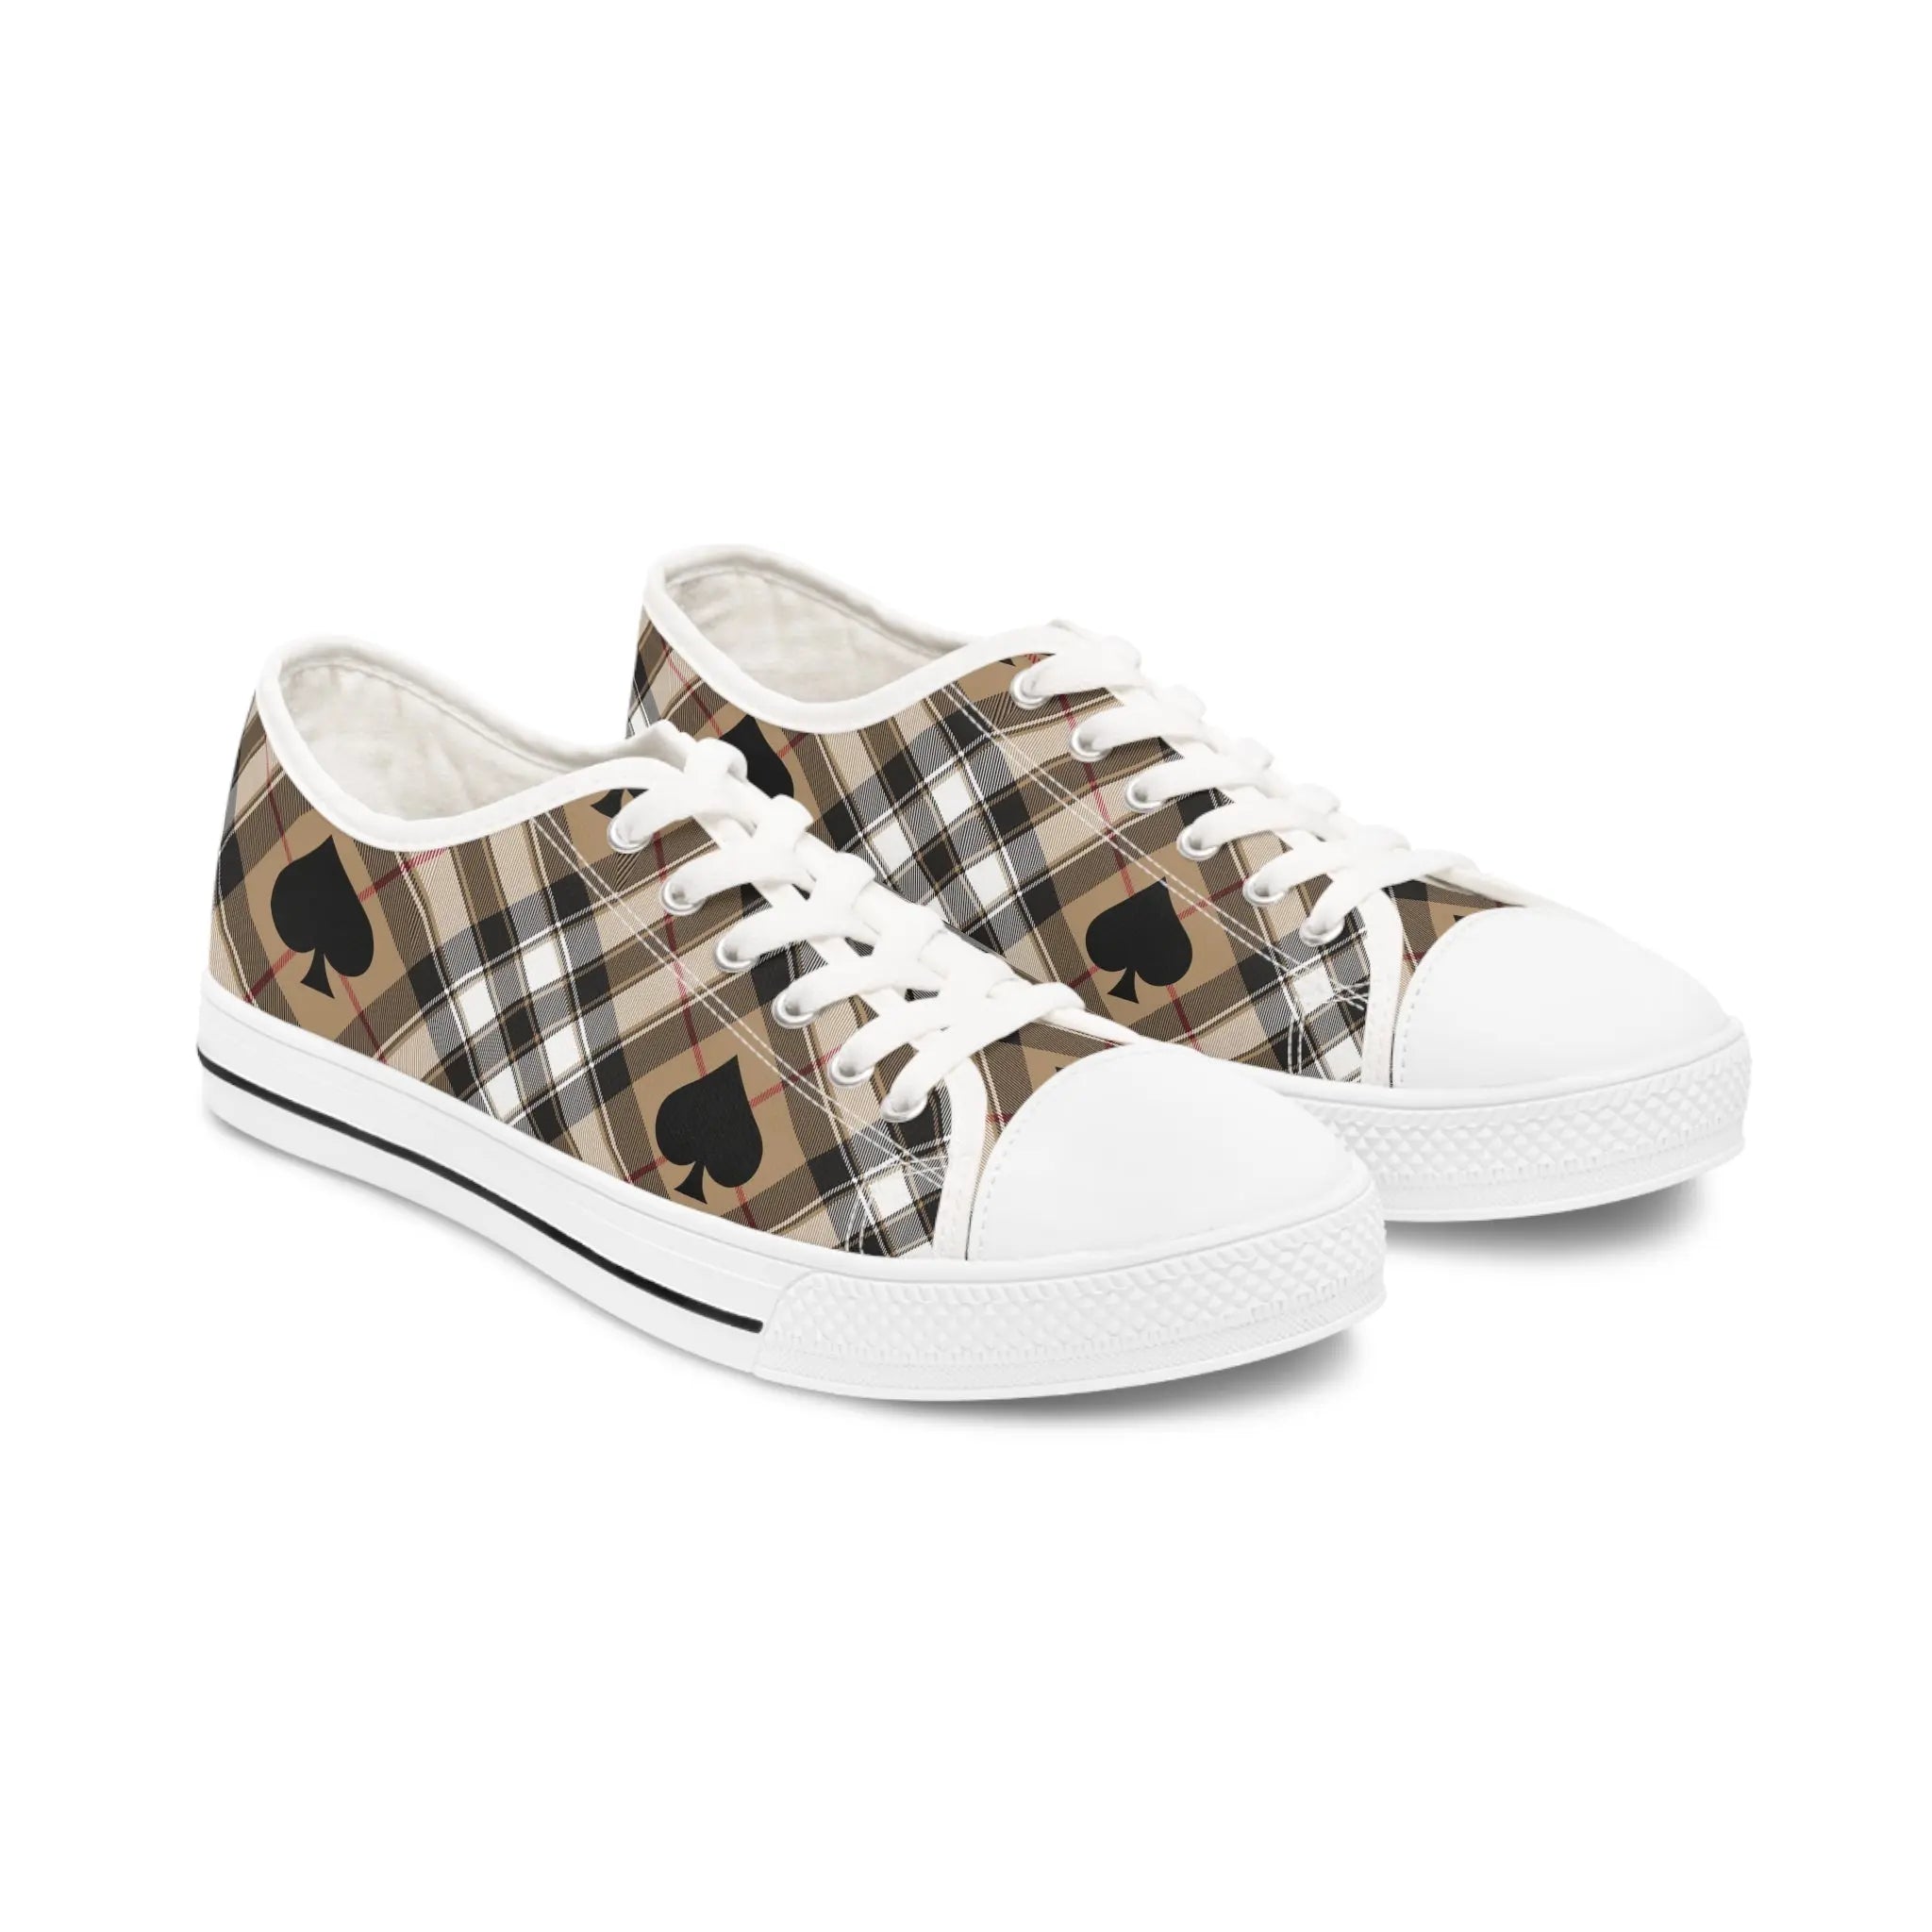  Abby Beige Ace of Spades Women's Low Top White Canvas Shoes, Slip On Canvas Shoes Shoes